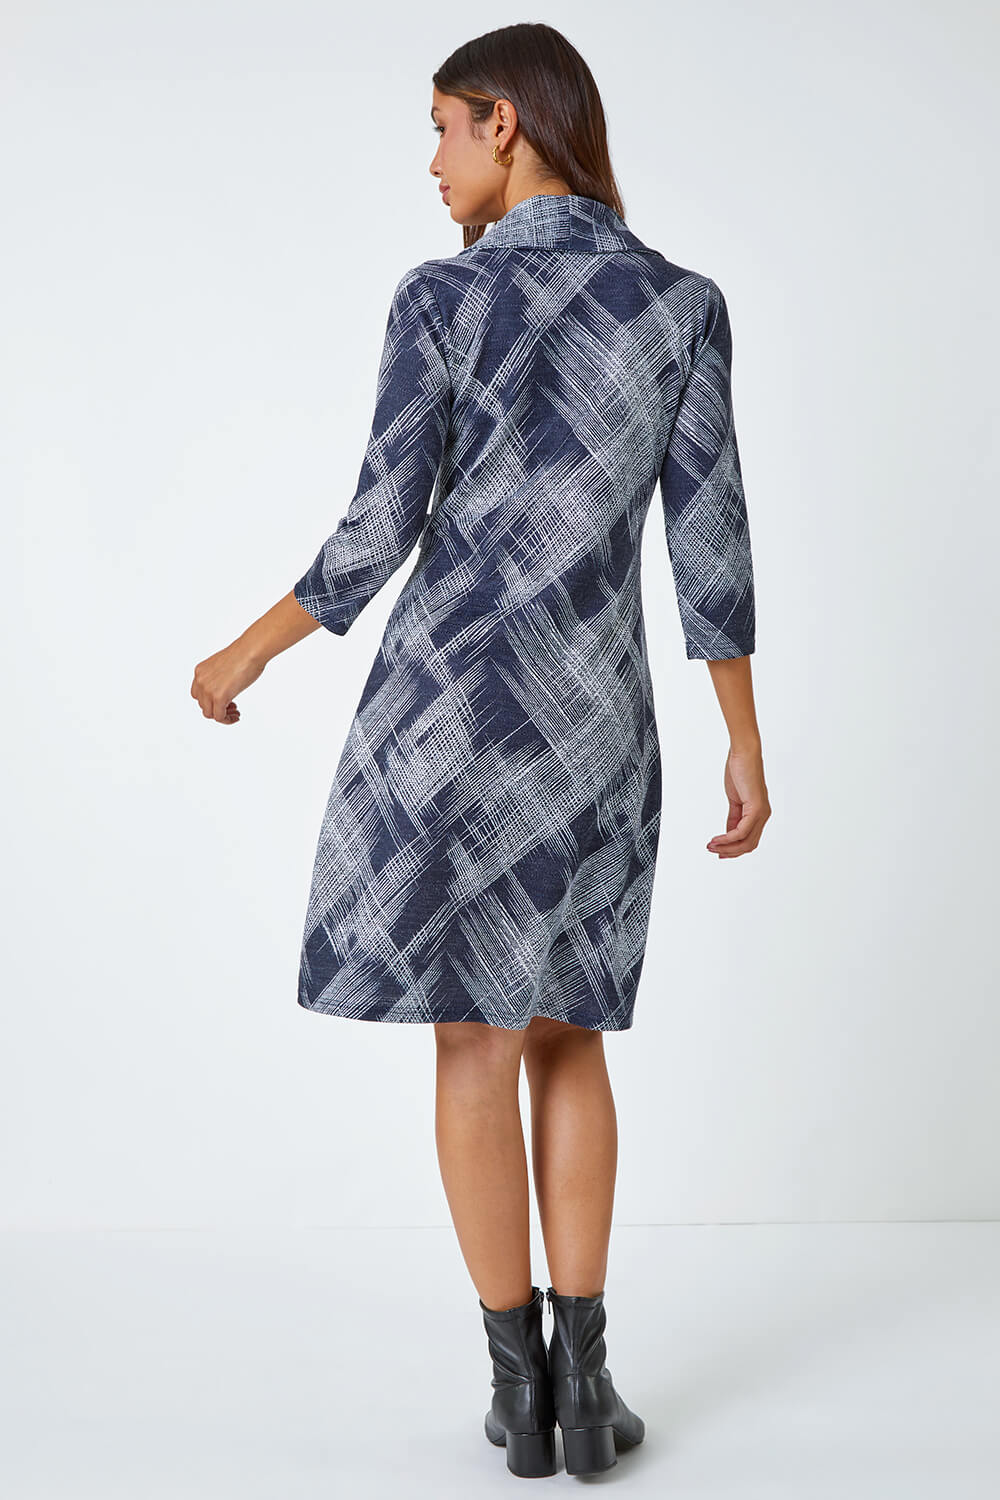 Navy  Abstract Cowl Neck Stretch Dress, Image 3 of 5